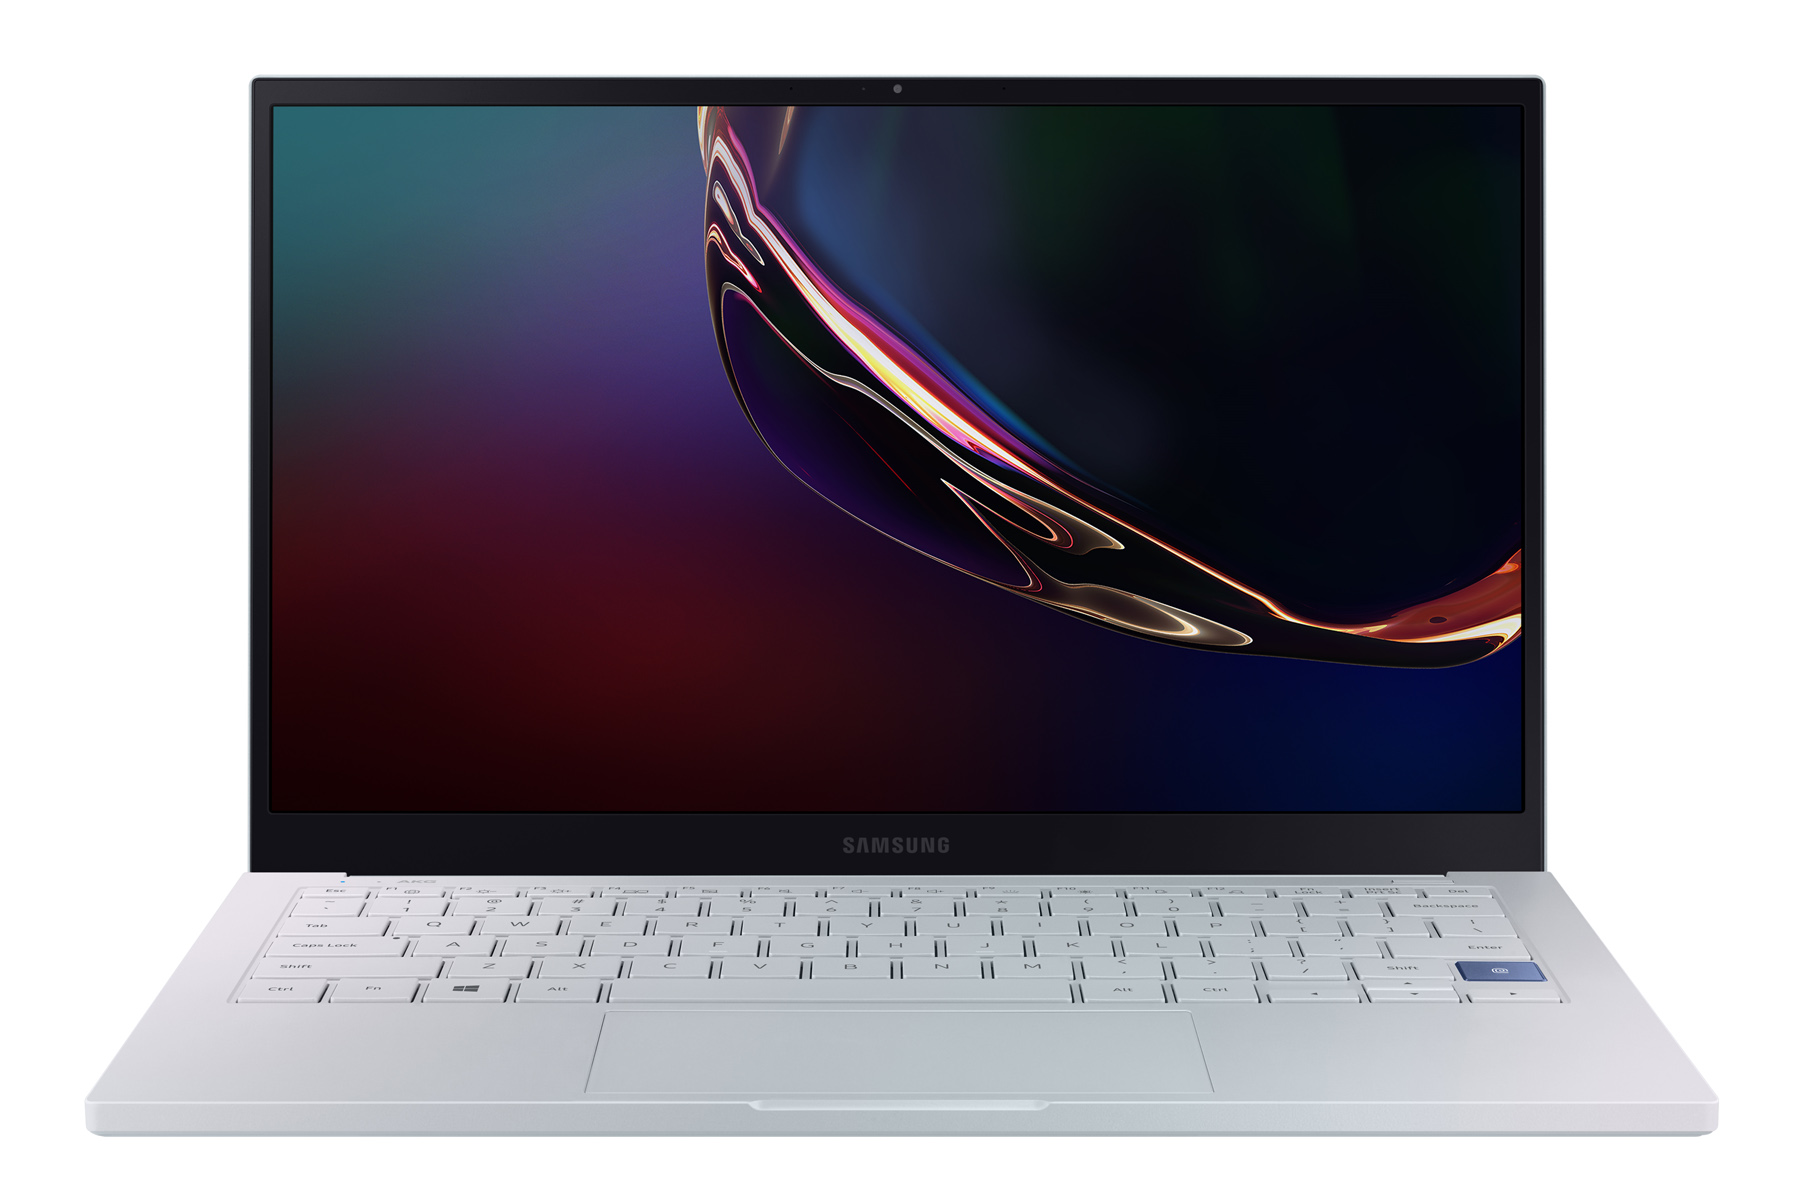 001_galaxybook_ion_13_product_images_front_silver.jpg